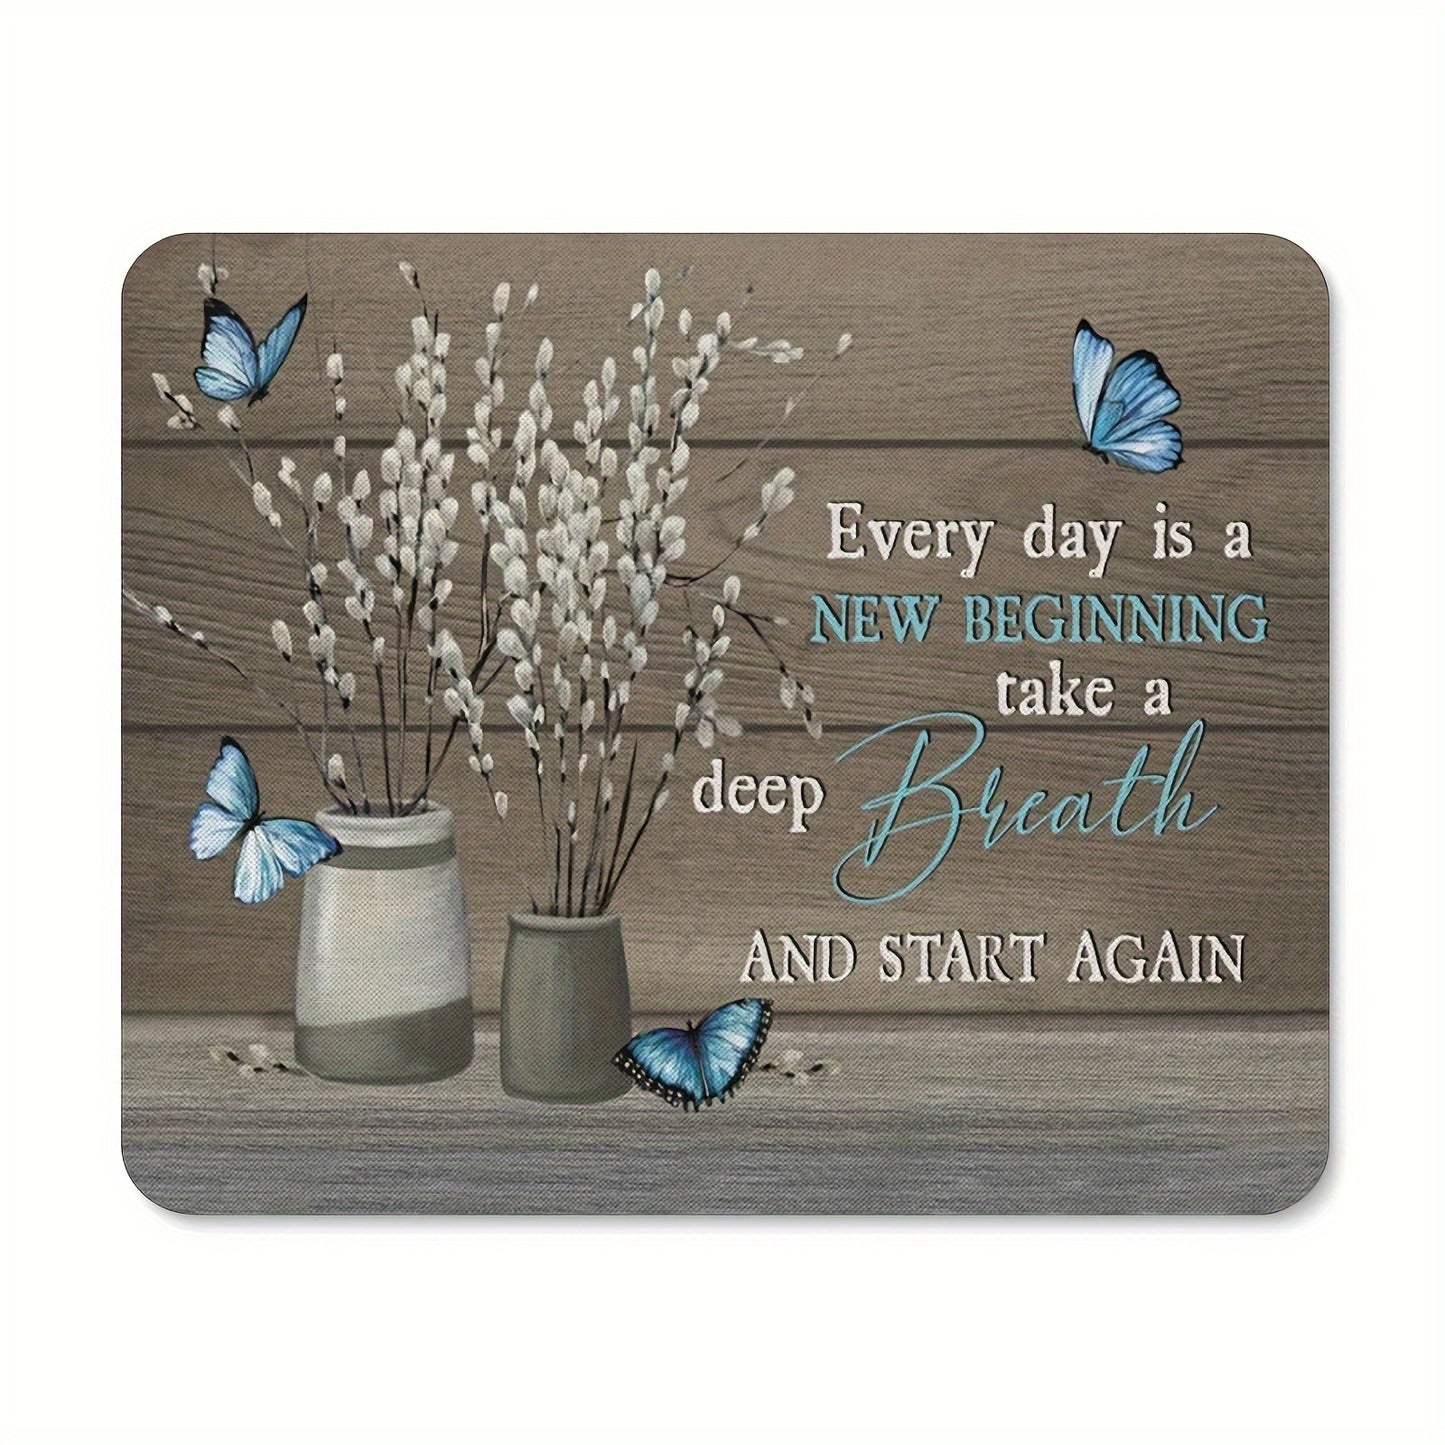 1pc Every Day Is A New Beginning Christian Computer Mouse Pad 9.45 * 7.9 Inches 3mm Thick claimedbygoddesigns